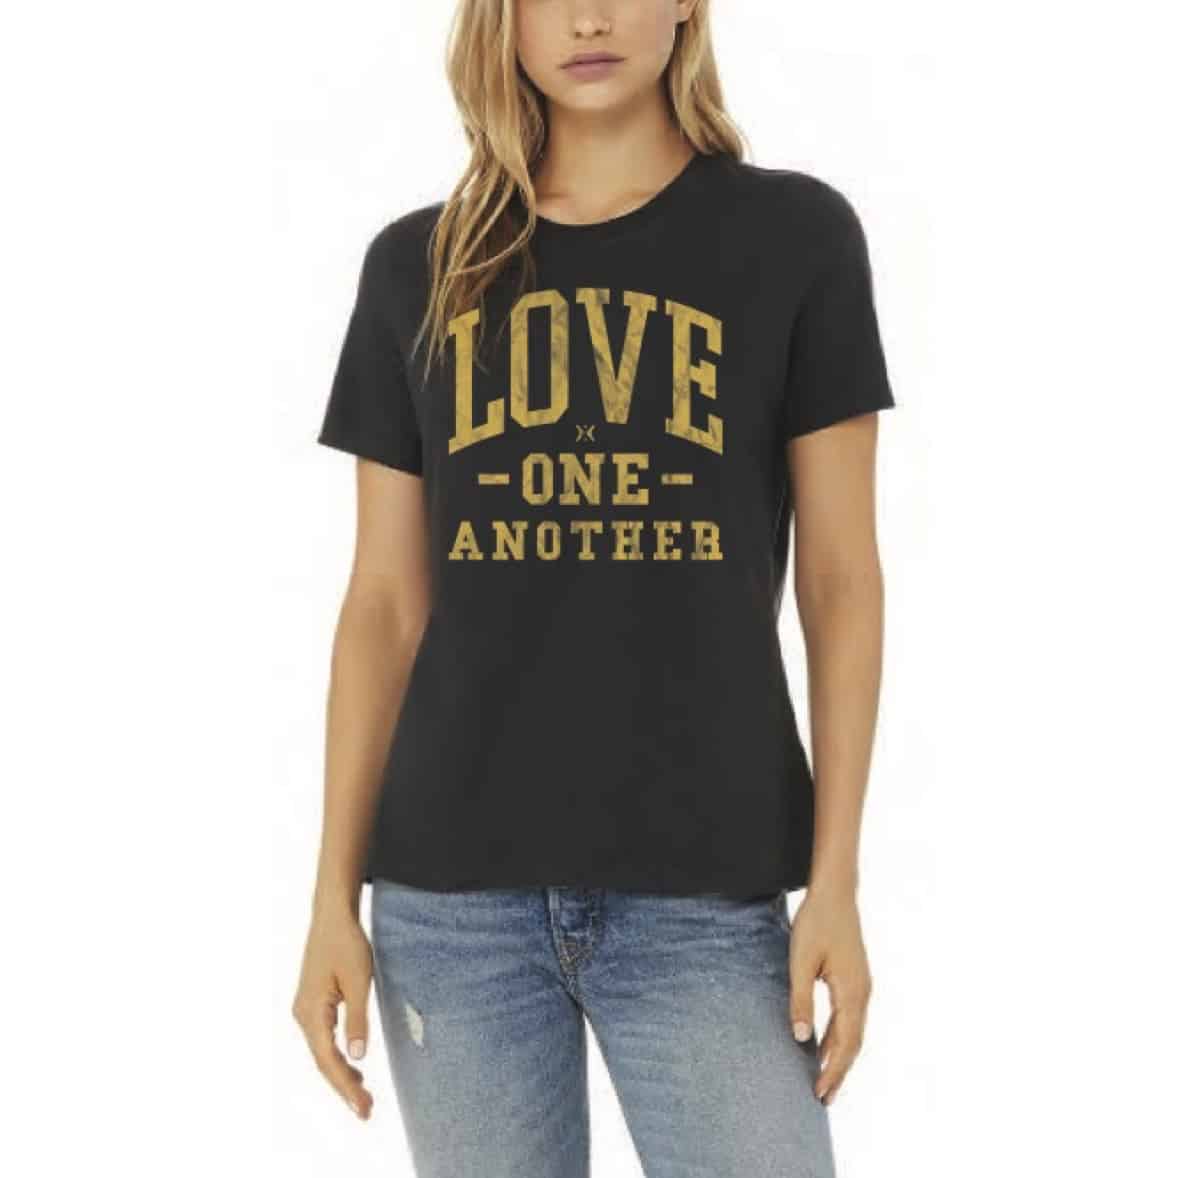 One Another Women's T-Shirt